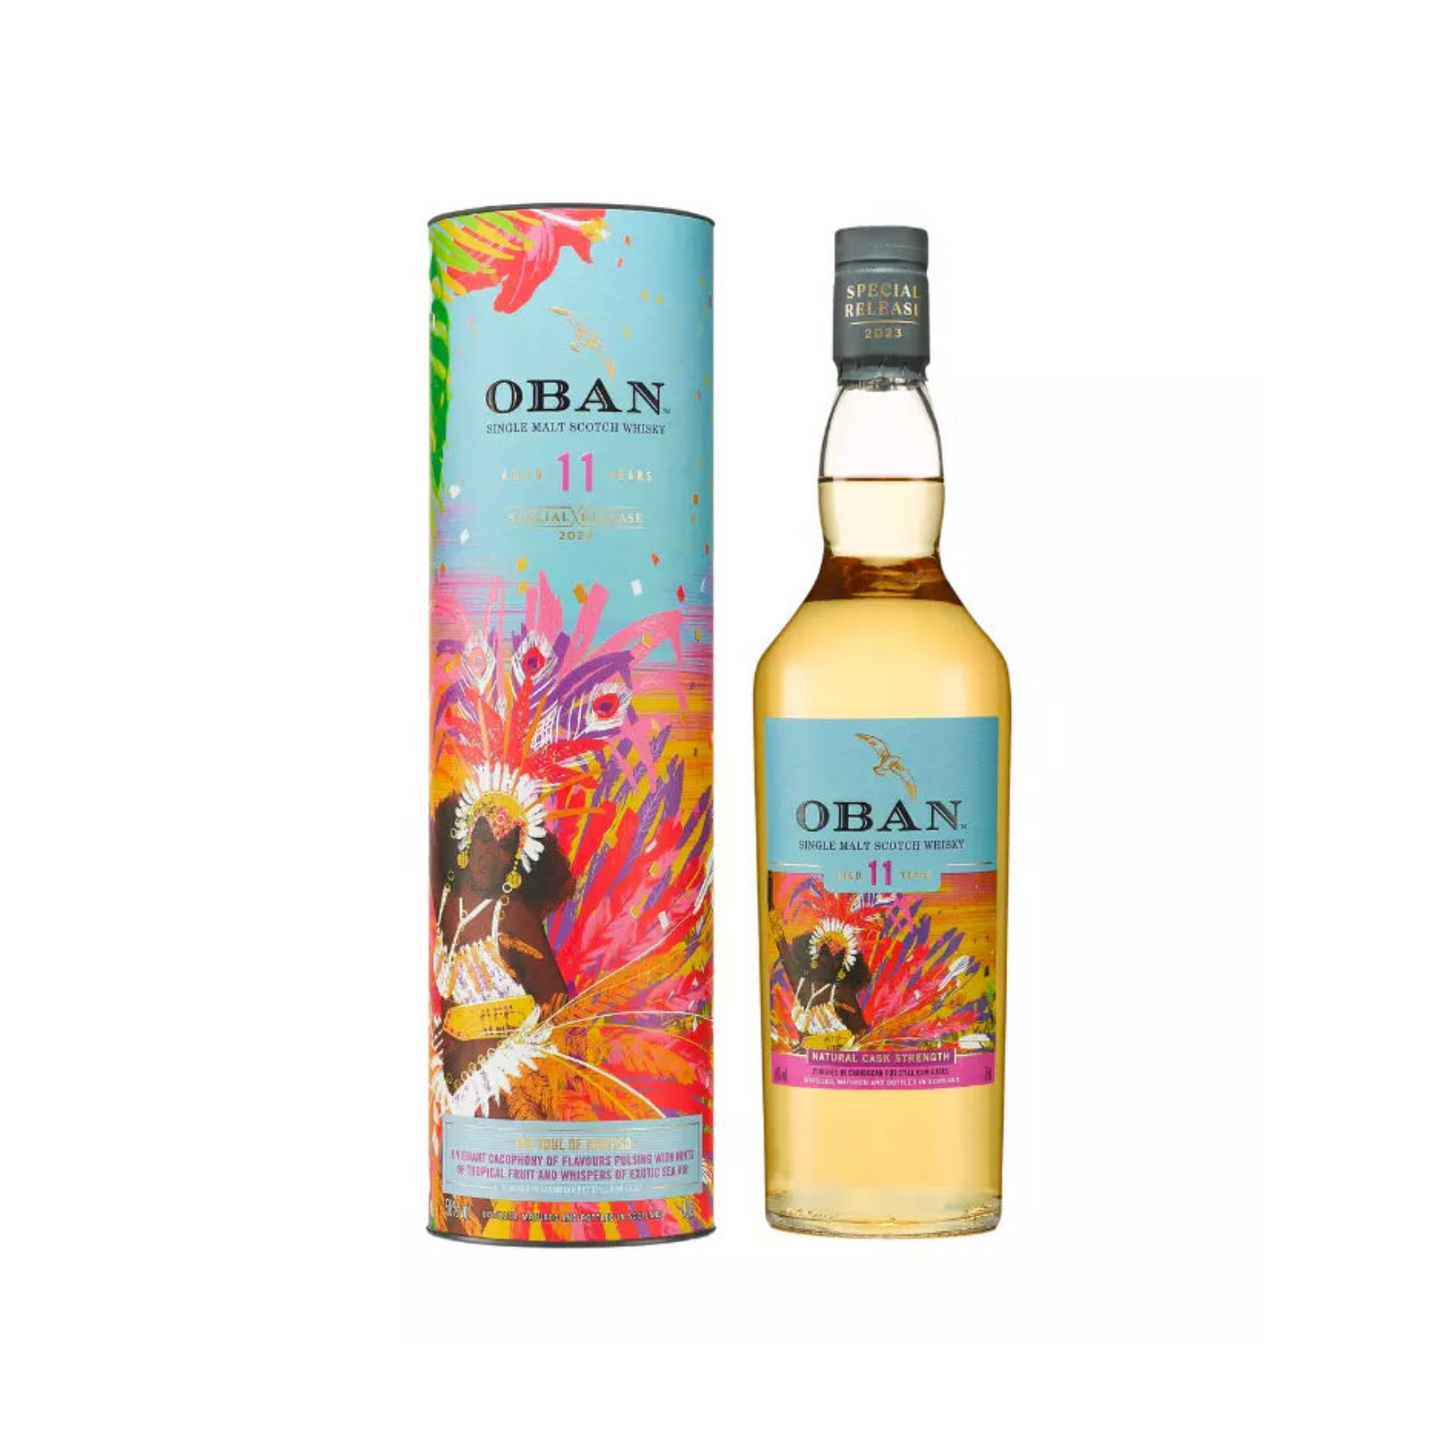 Oban Single Malt Scotch Special Release Natural Cask Strength 11 Year